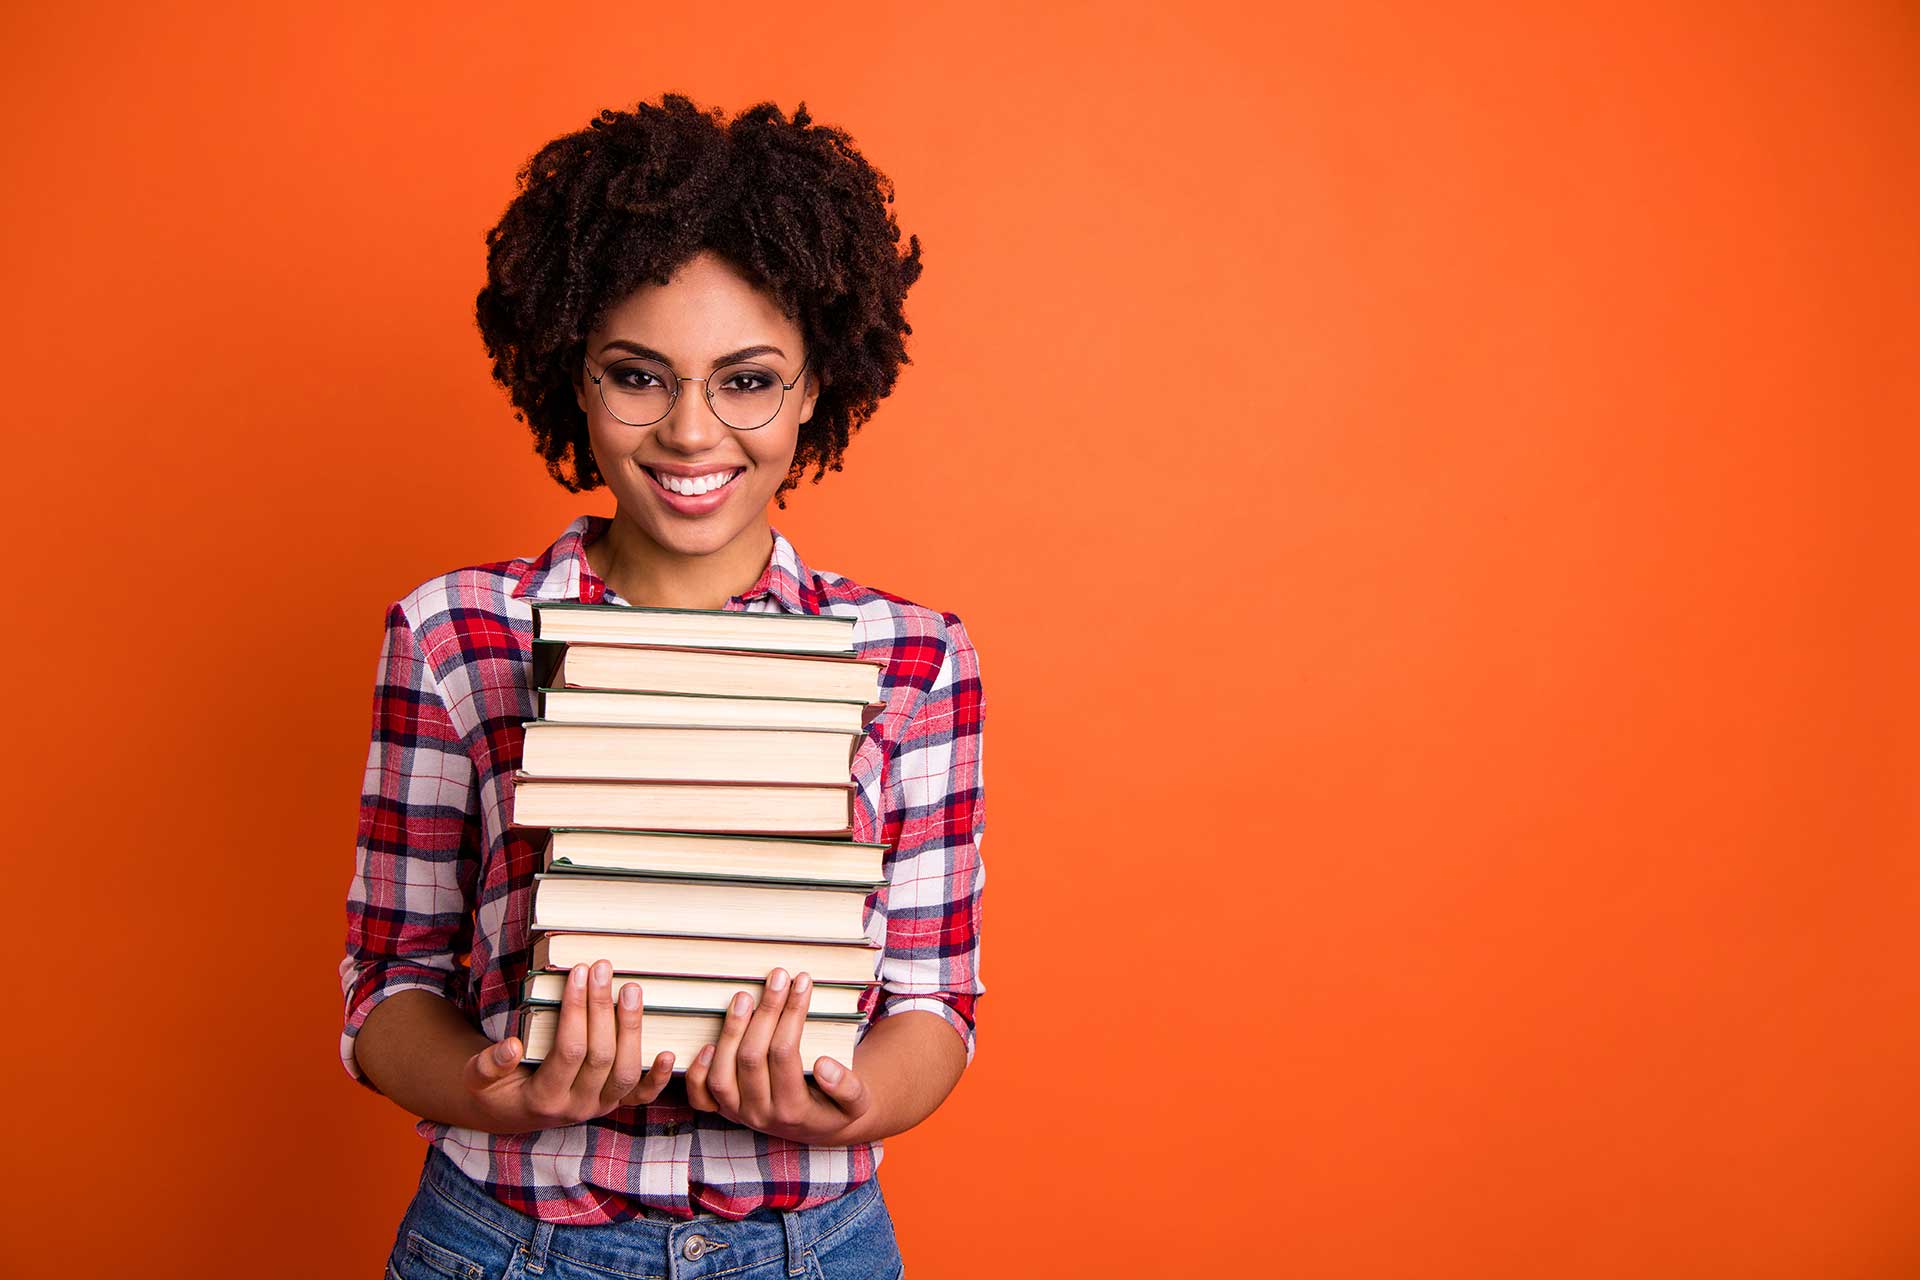 Student holding pile of books